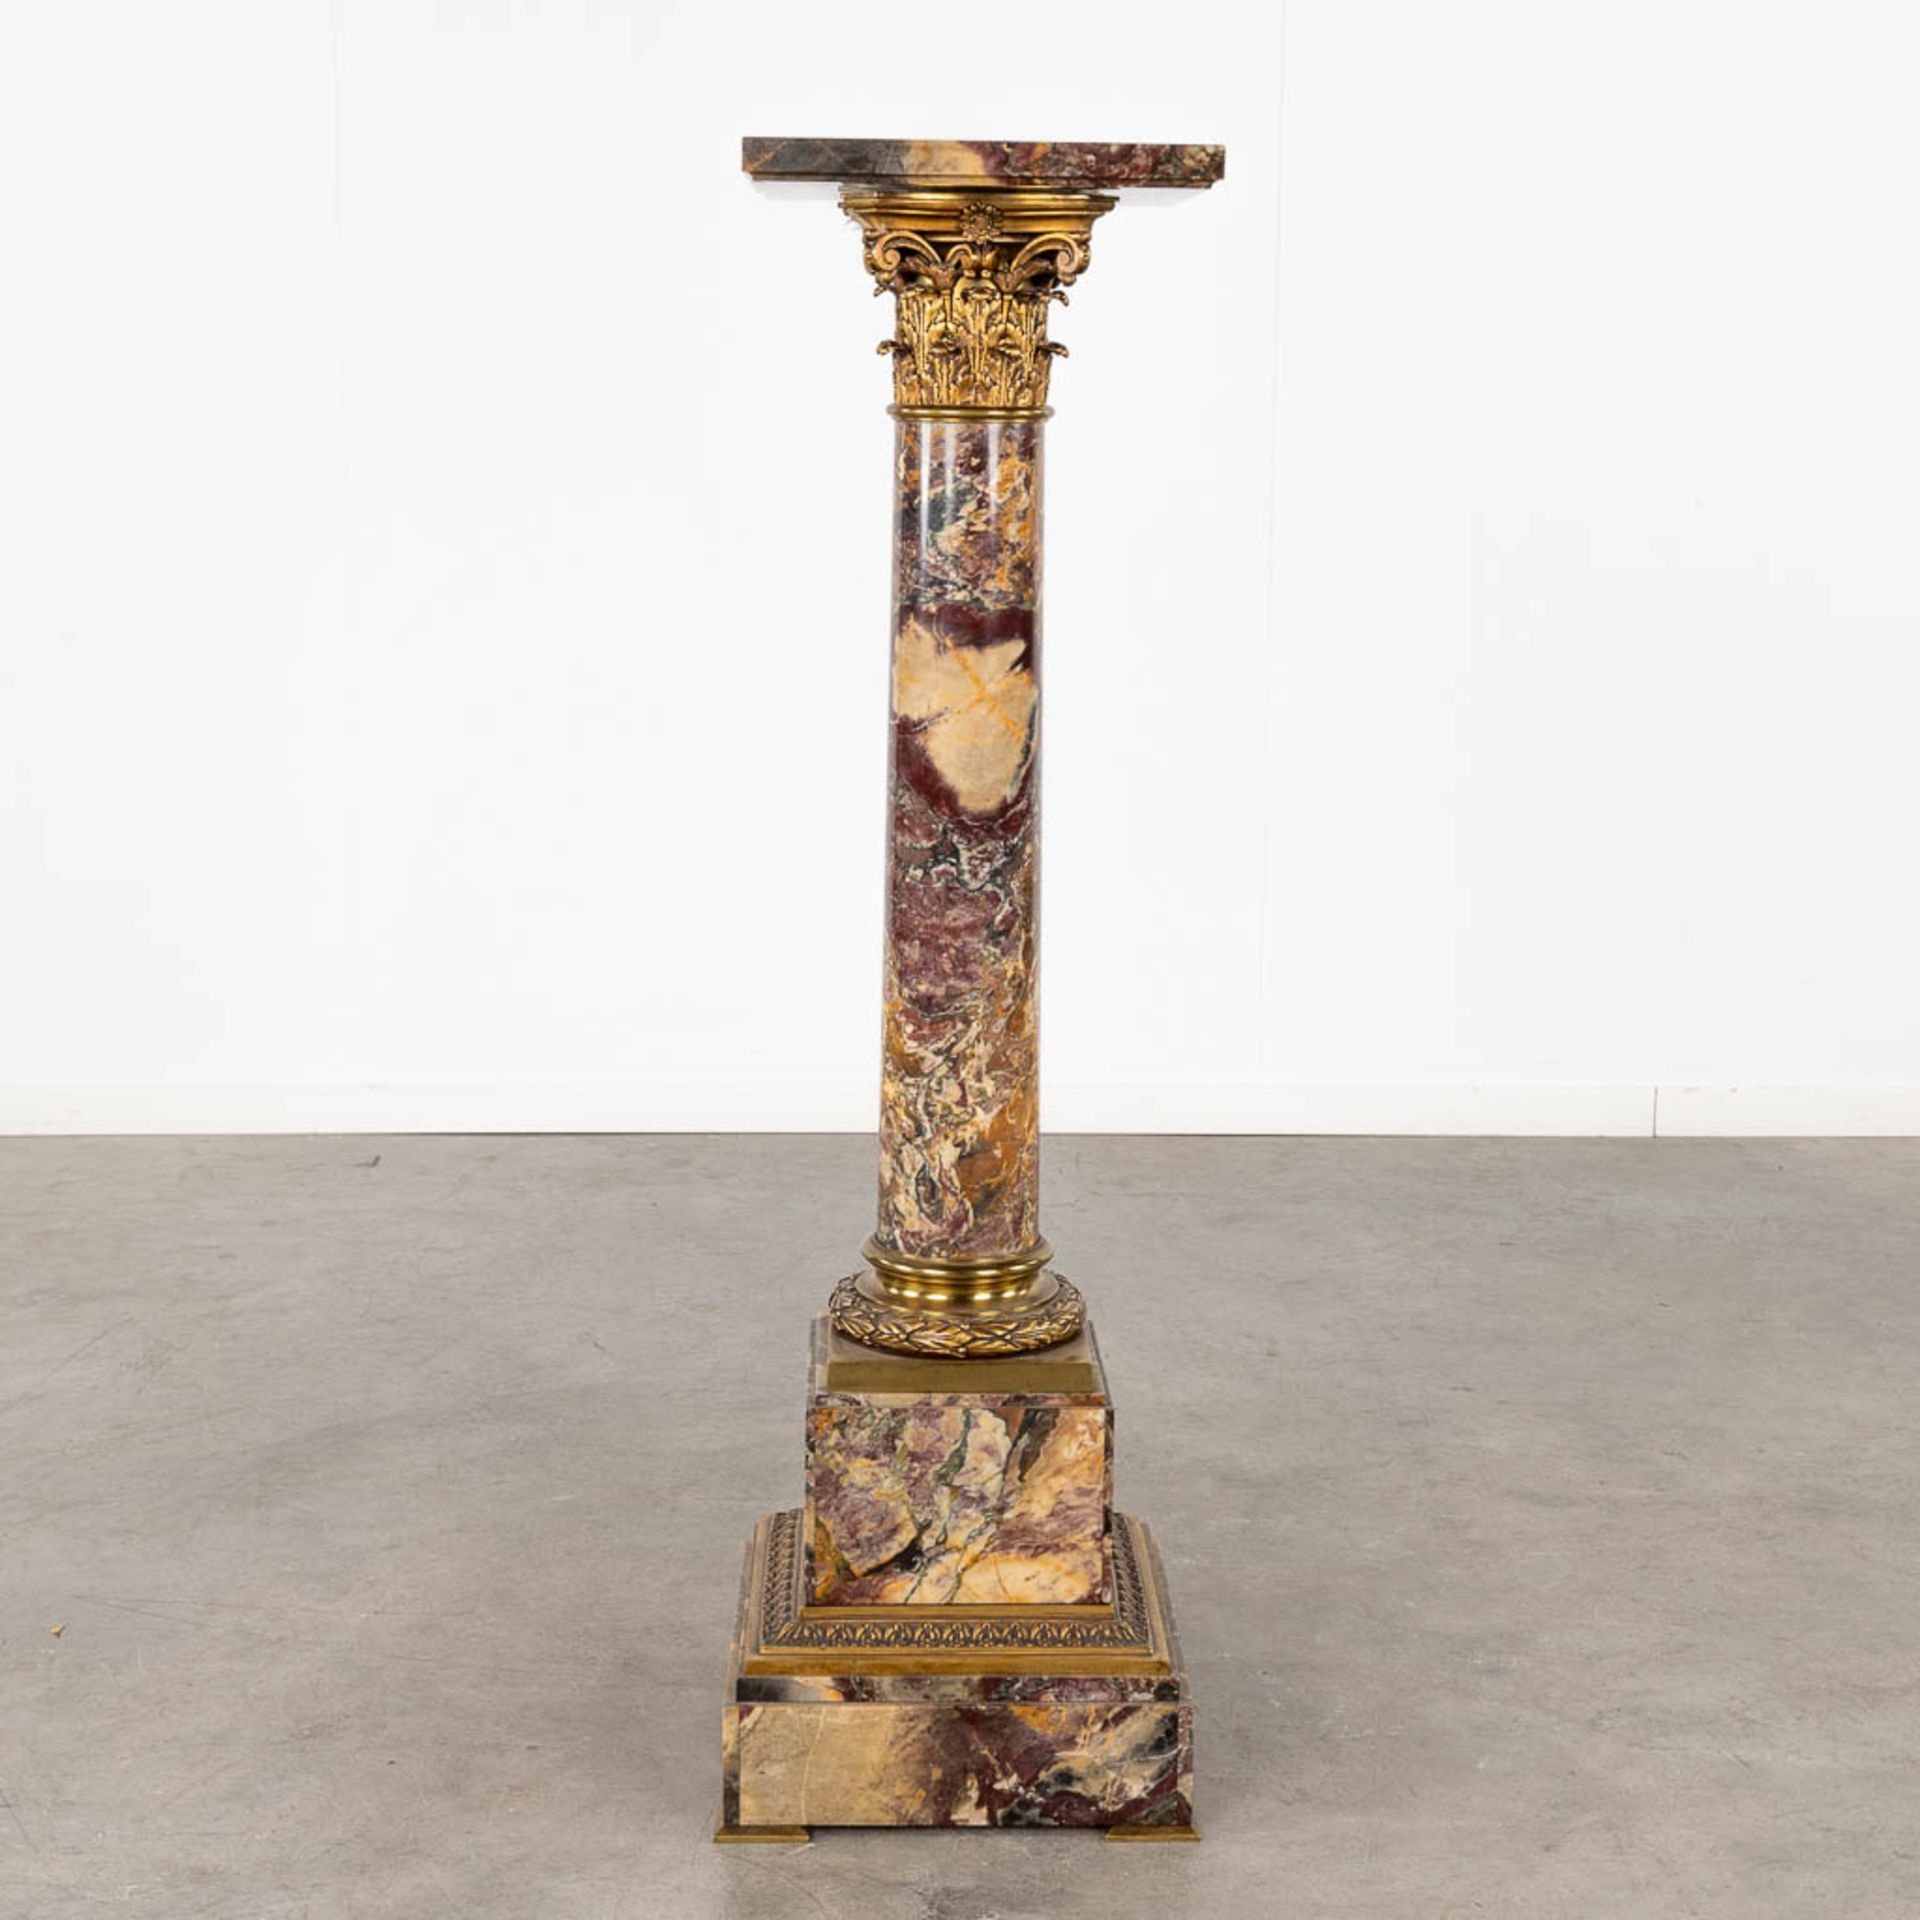 A pedestal, marble mounted with bronze in Corinthian style. Circa 1920. (D:35 x W:35 x H:120 cm) - Image 3 of 13